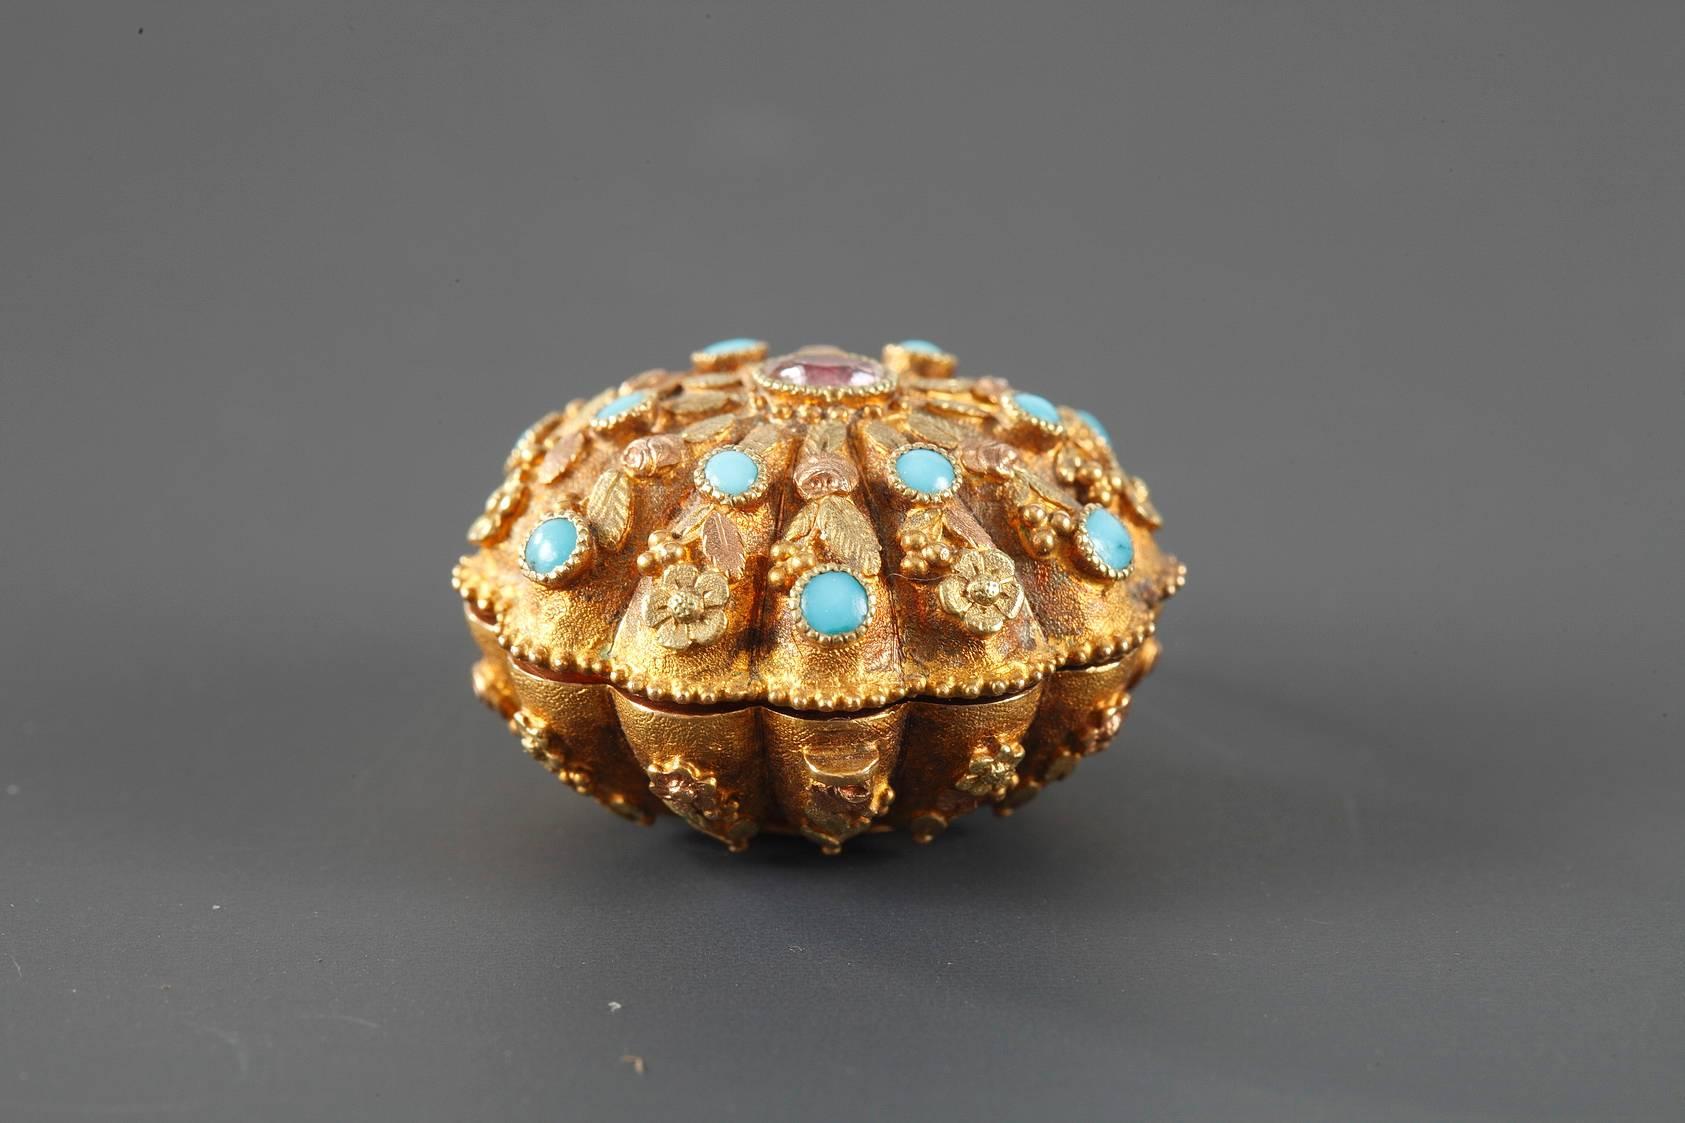 Shell-shaped vinaigrette pendant intricately sculpted with flowers and seeds in two shades of gold. The lid is decorated with a ruby cabochon surrounded by small turquoise beads. The interior grill is in the shape of leaves and serves to hold in